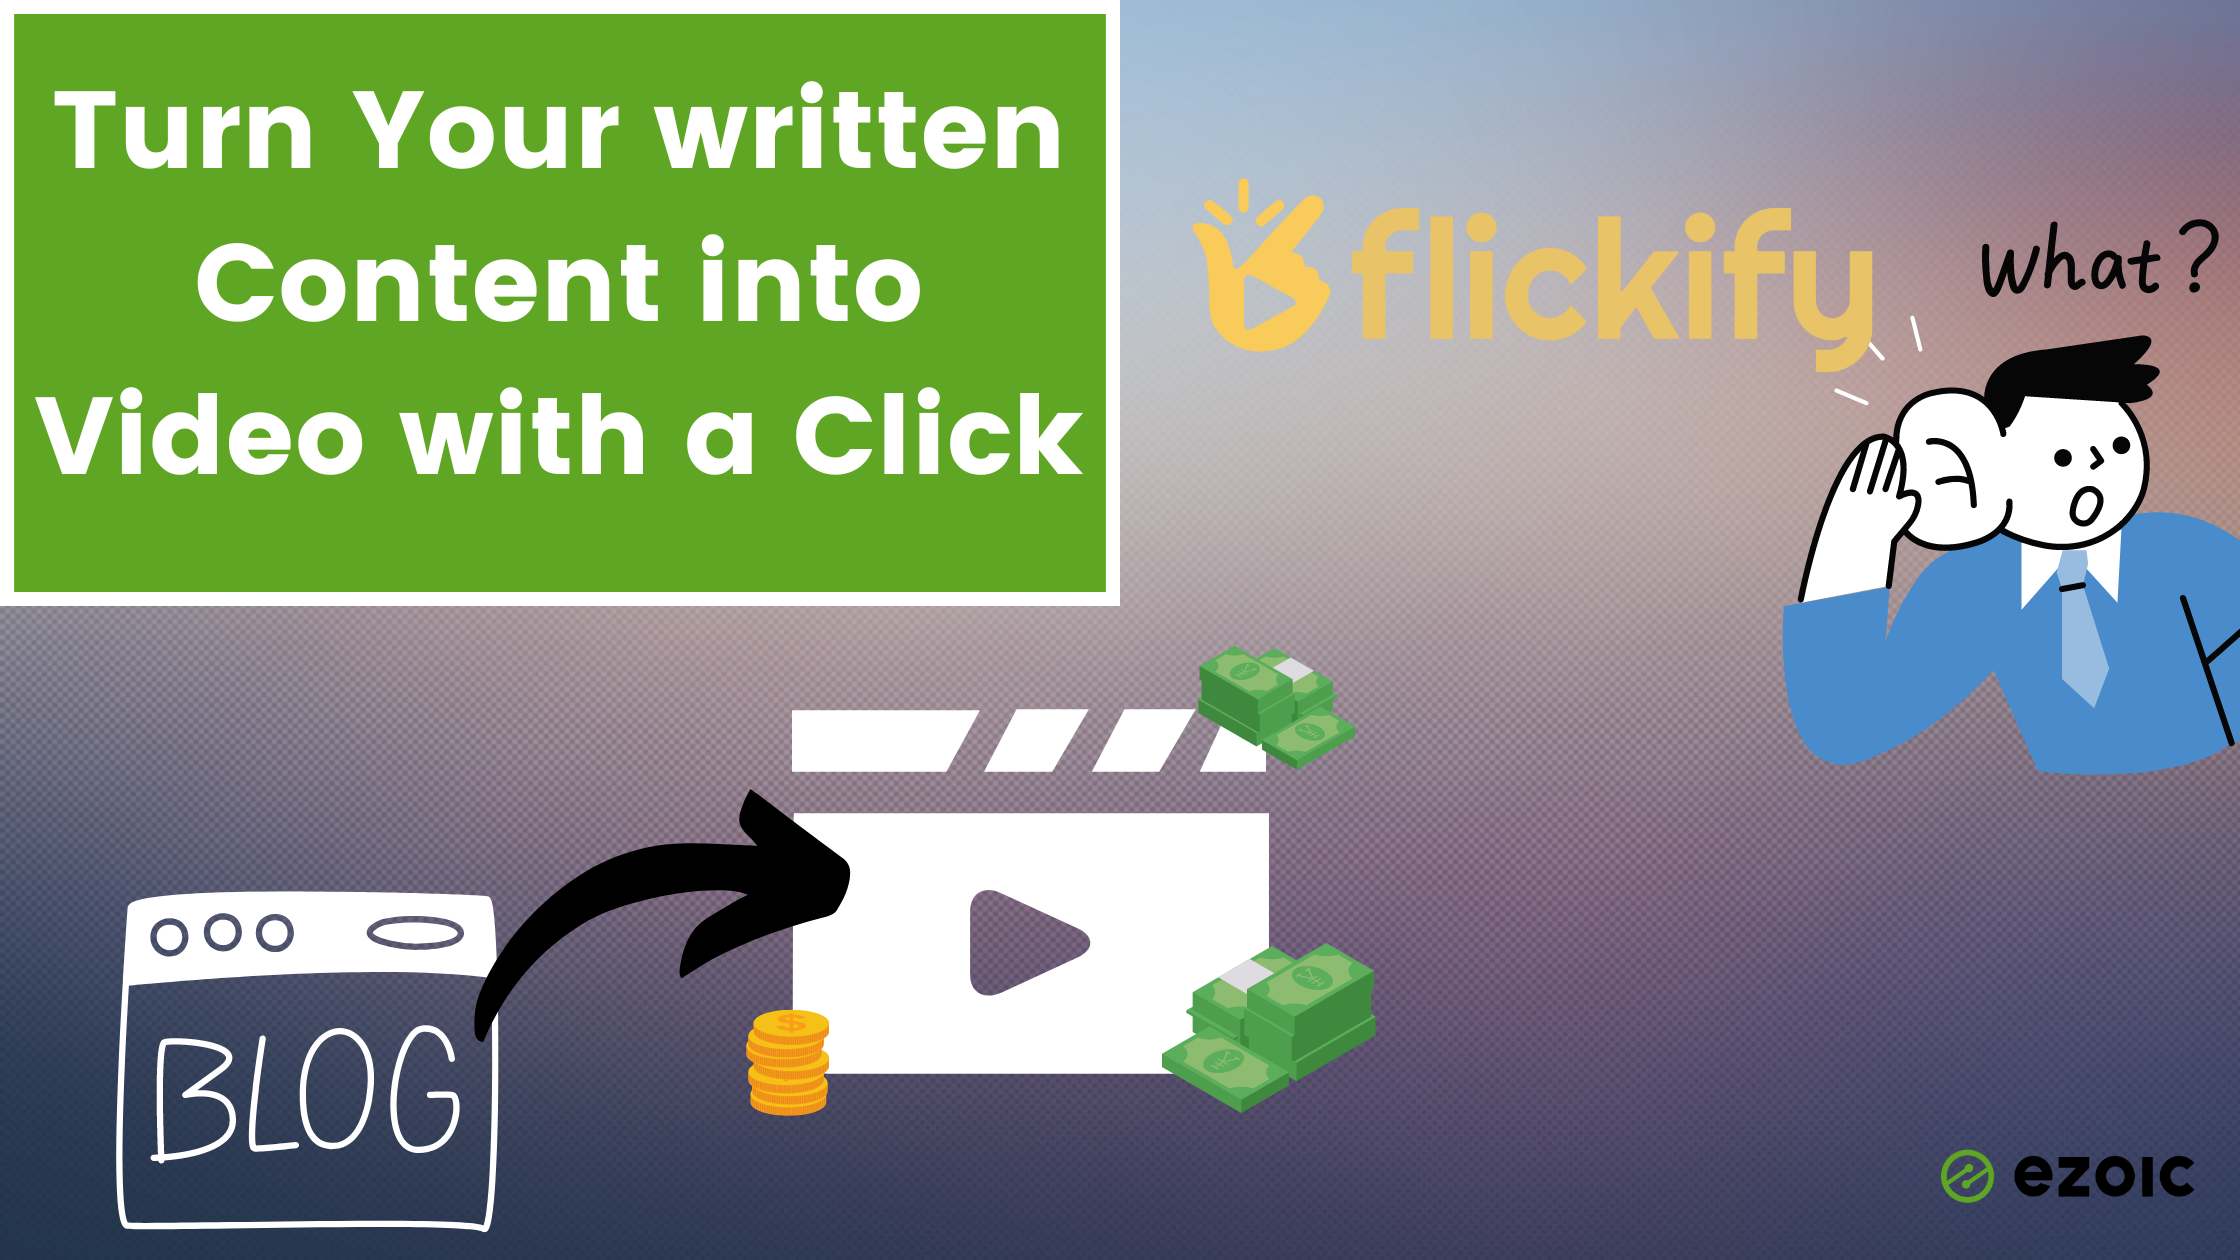 Turn Your Written Content into Video with a Click of a Button